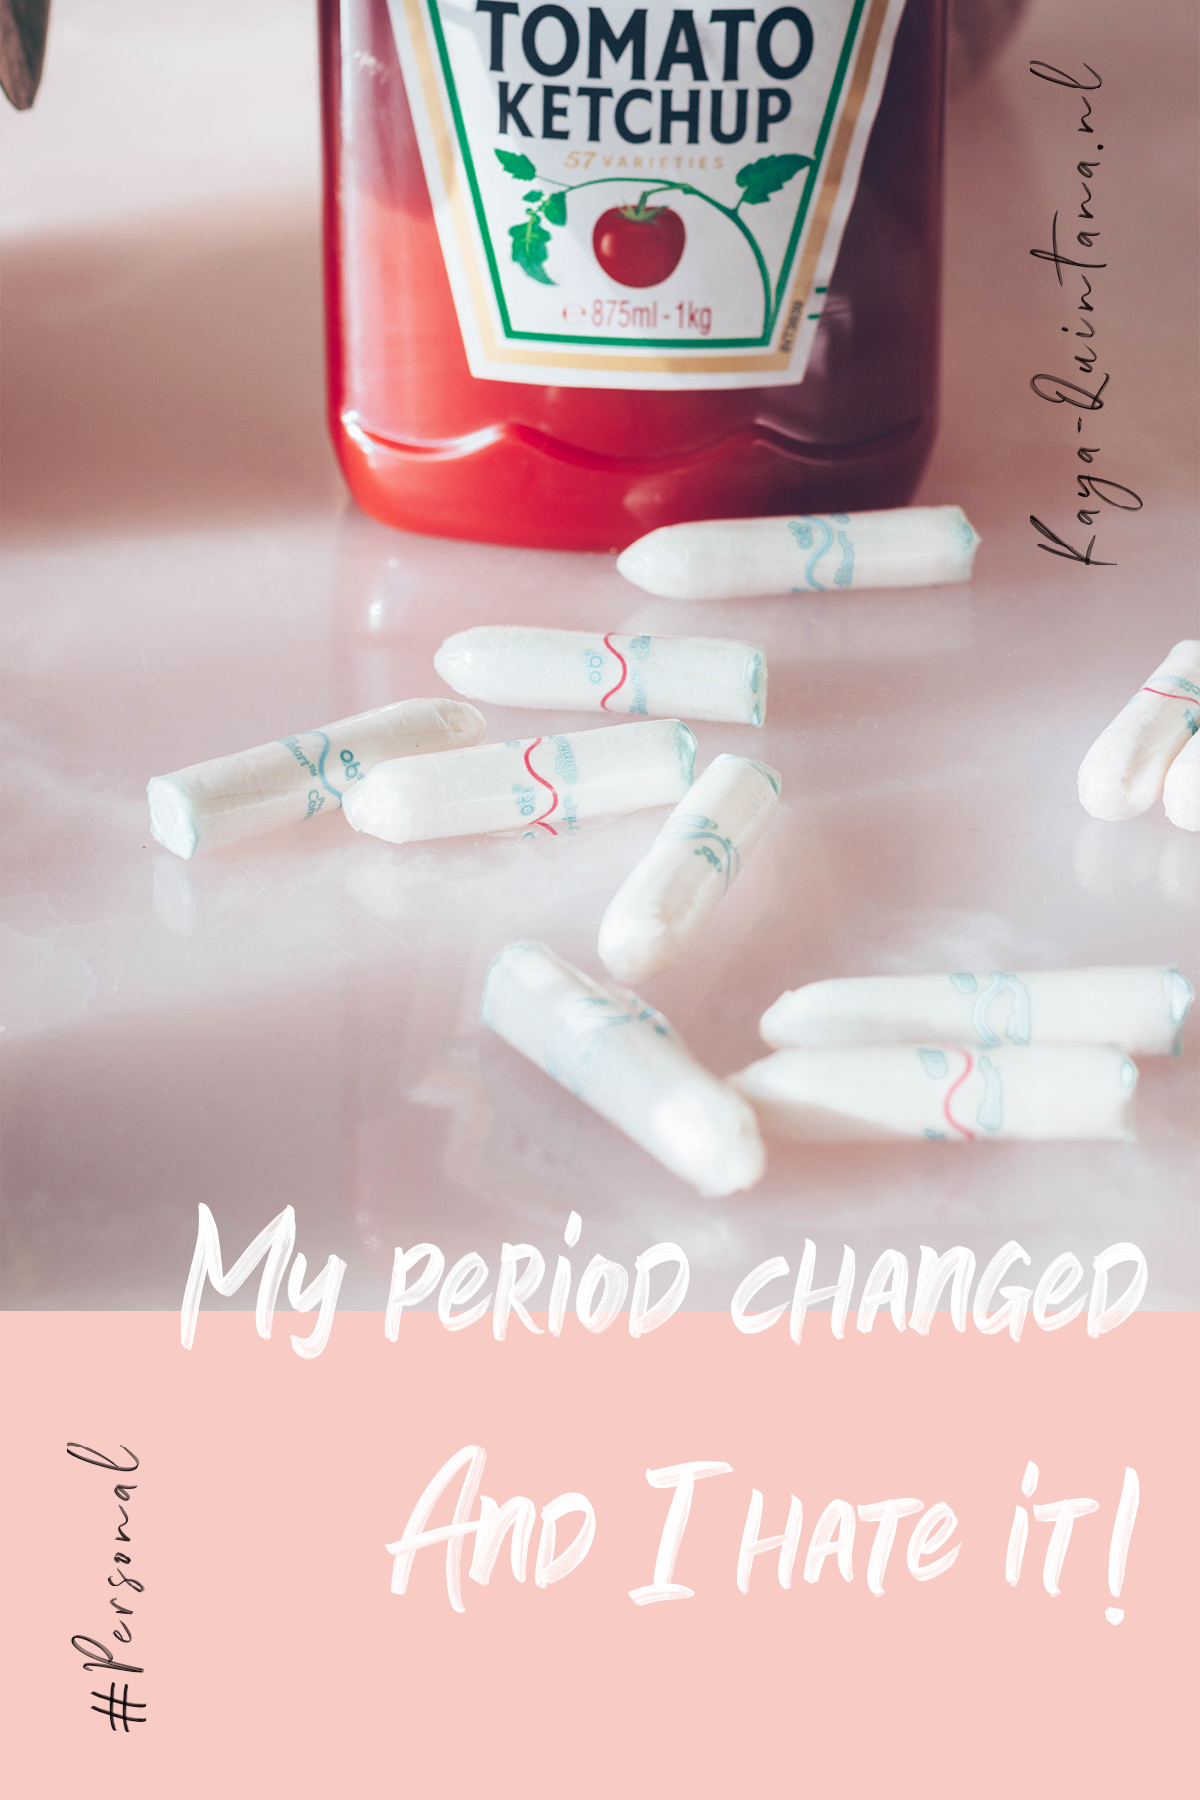 My period changed